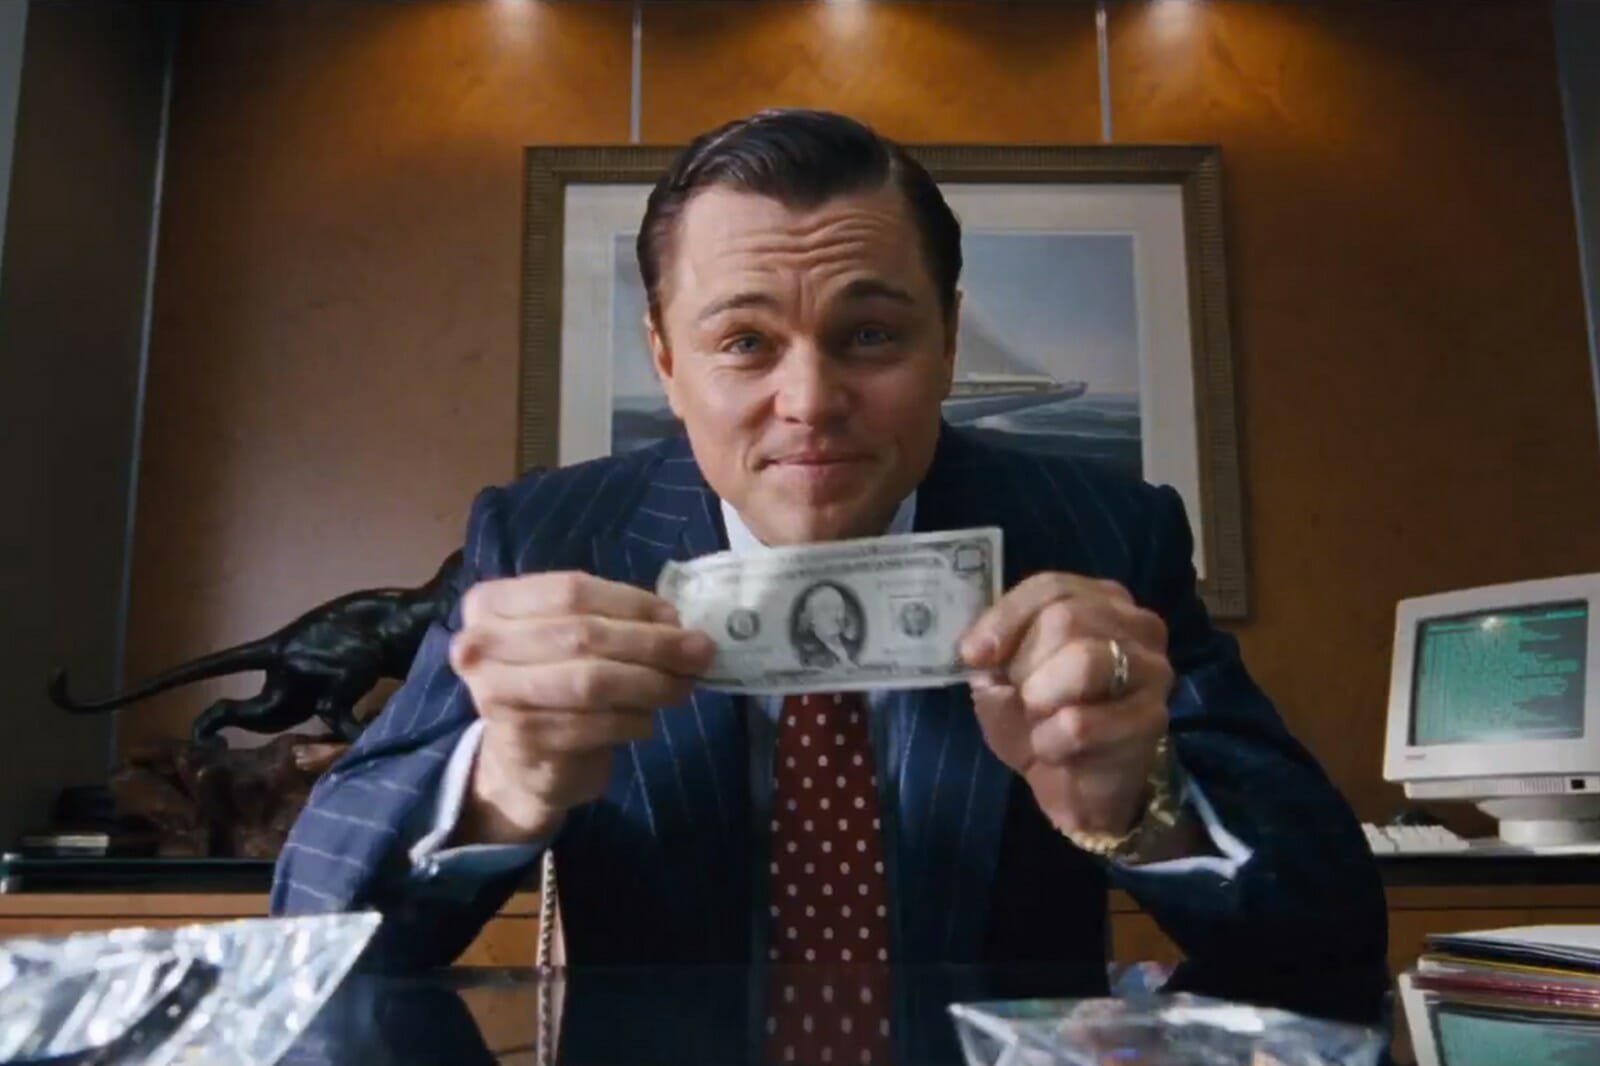 leonardo-dicaprio-in-the-wolf-of-wall-street